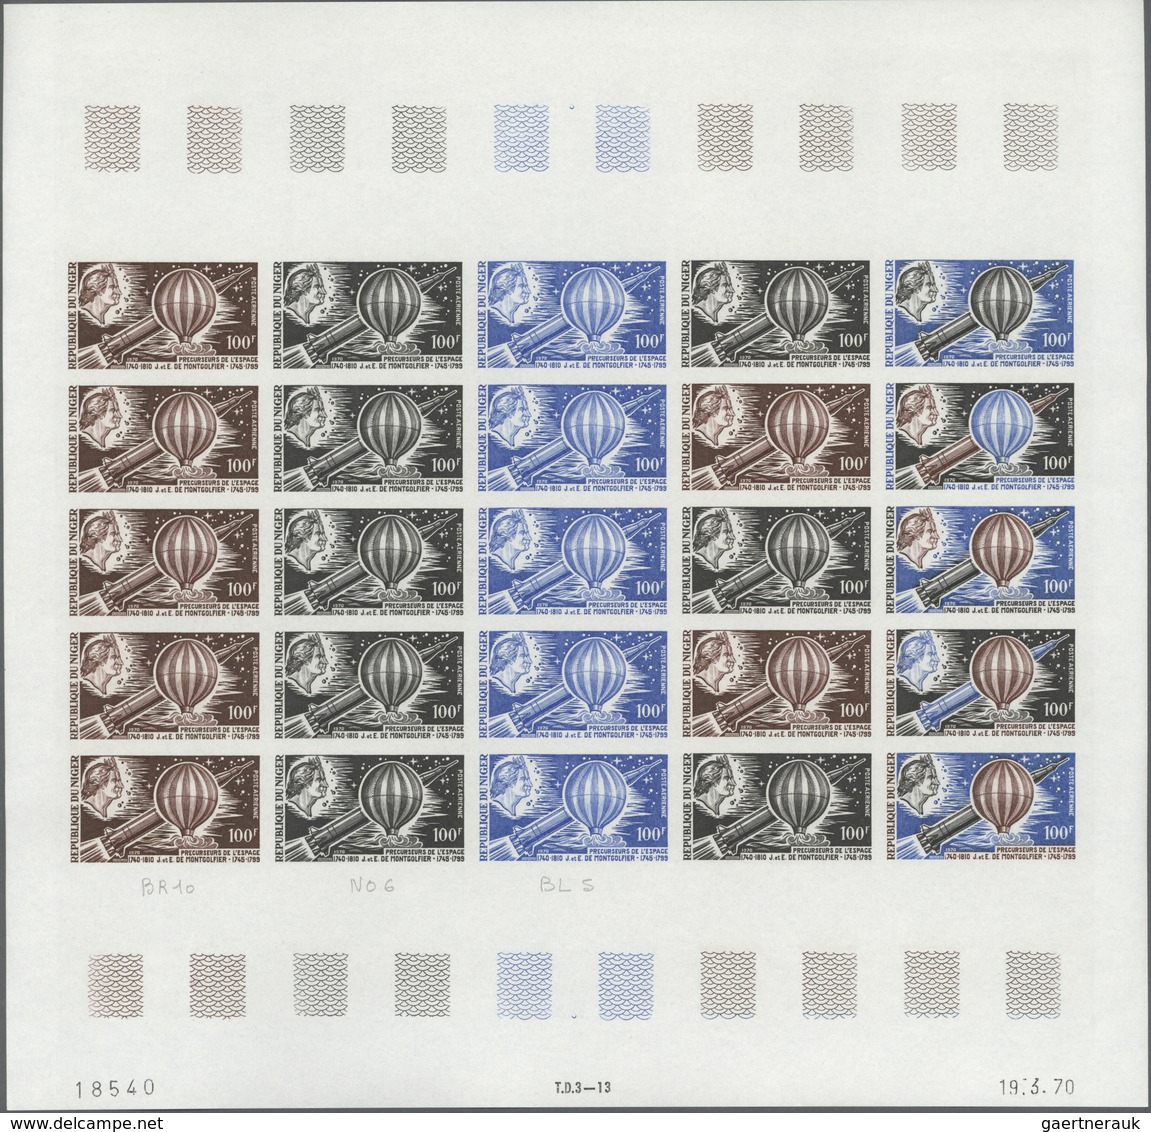 Thematik: Raumfahrt / astronautics: 1970, Niger. Complete set "Pioneers of Space Research" (5 values